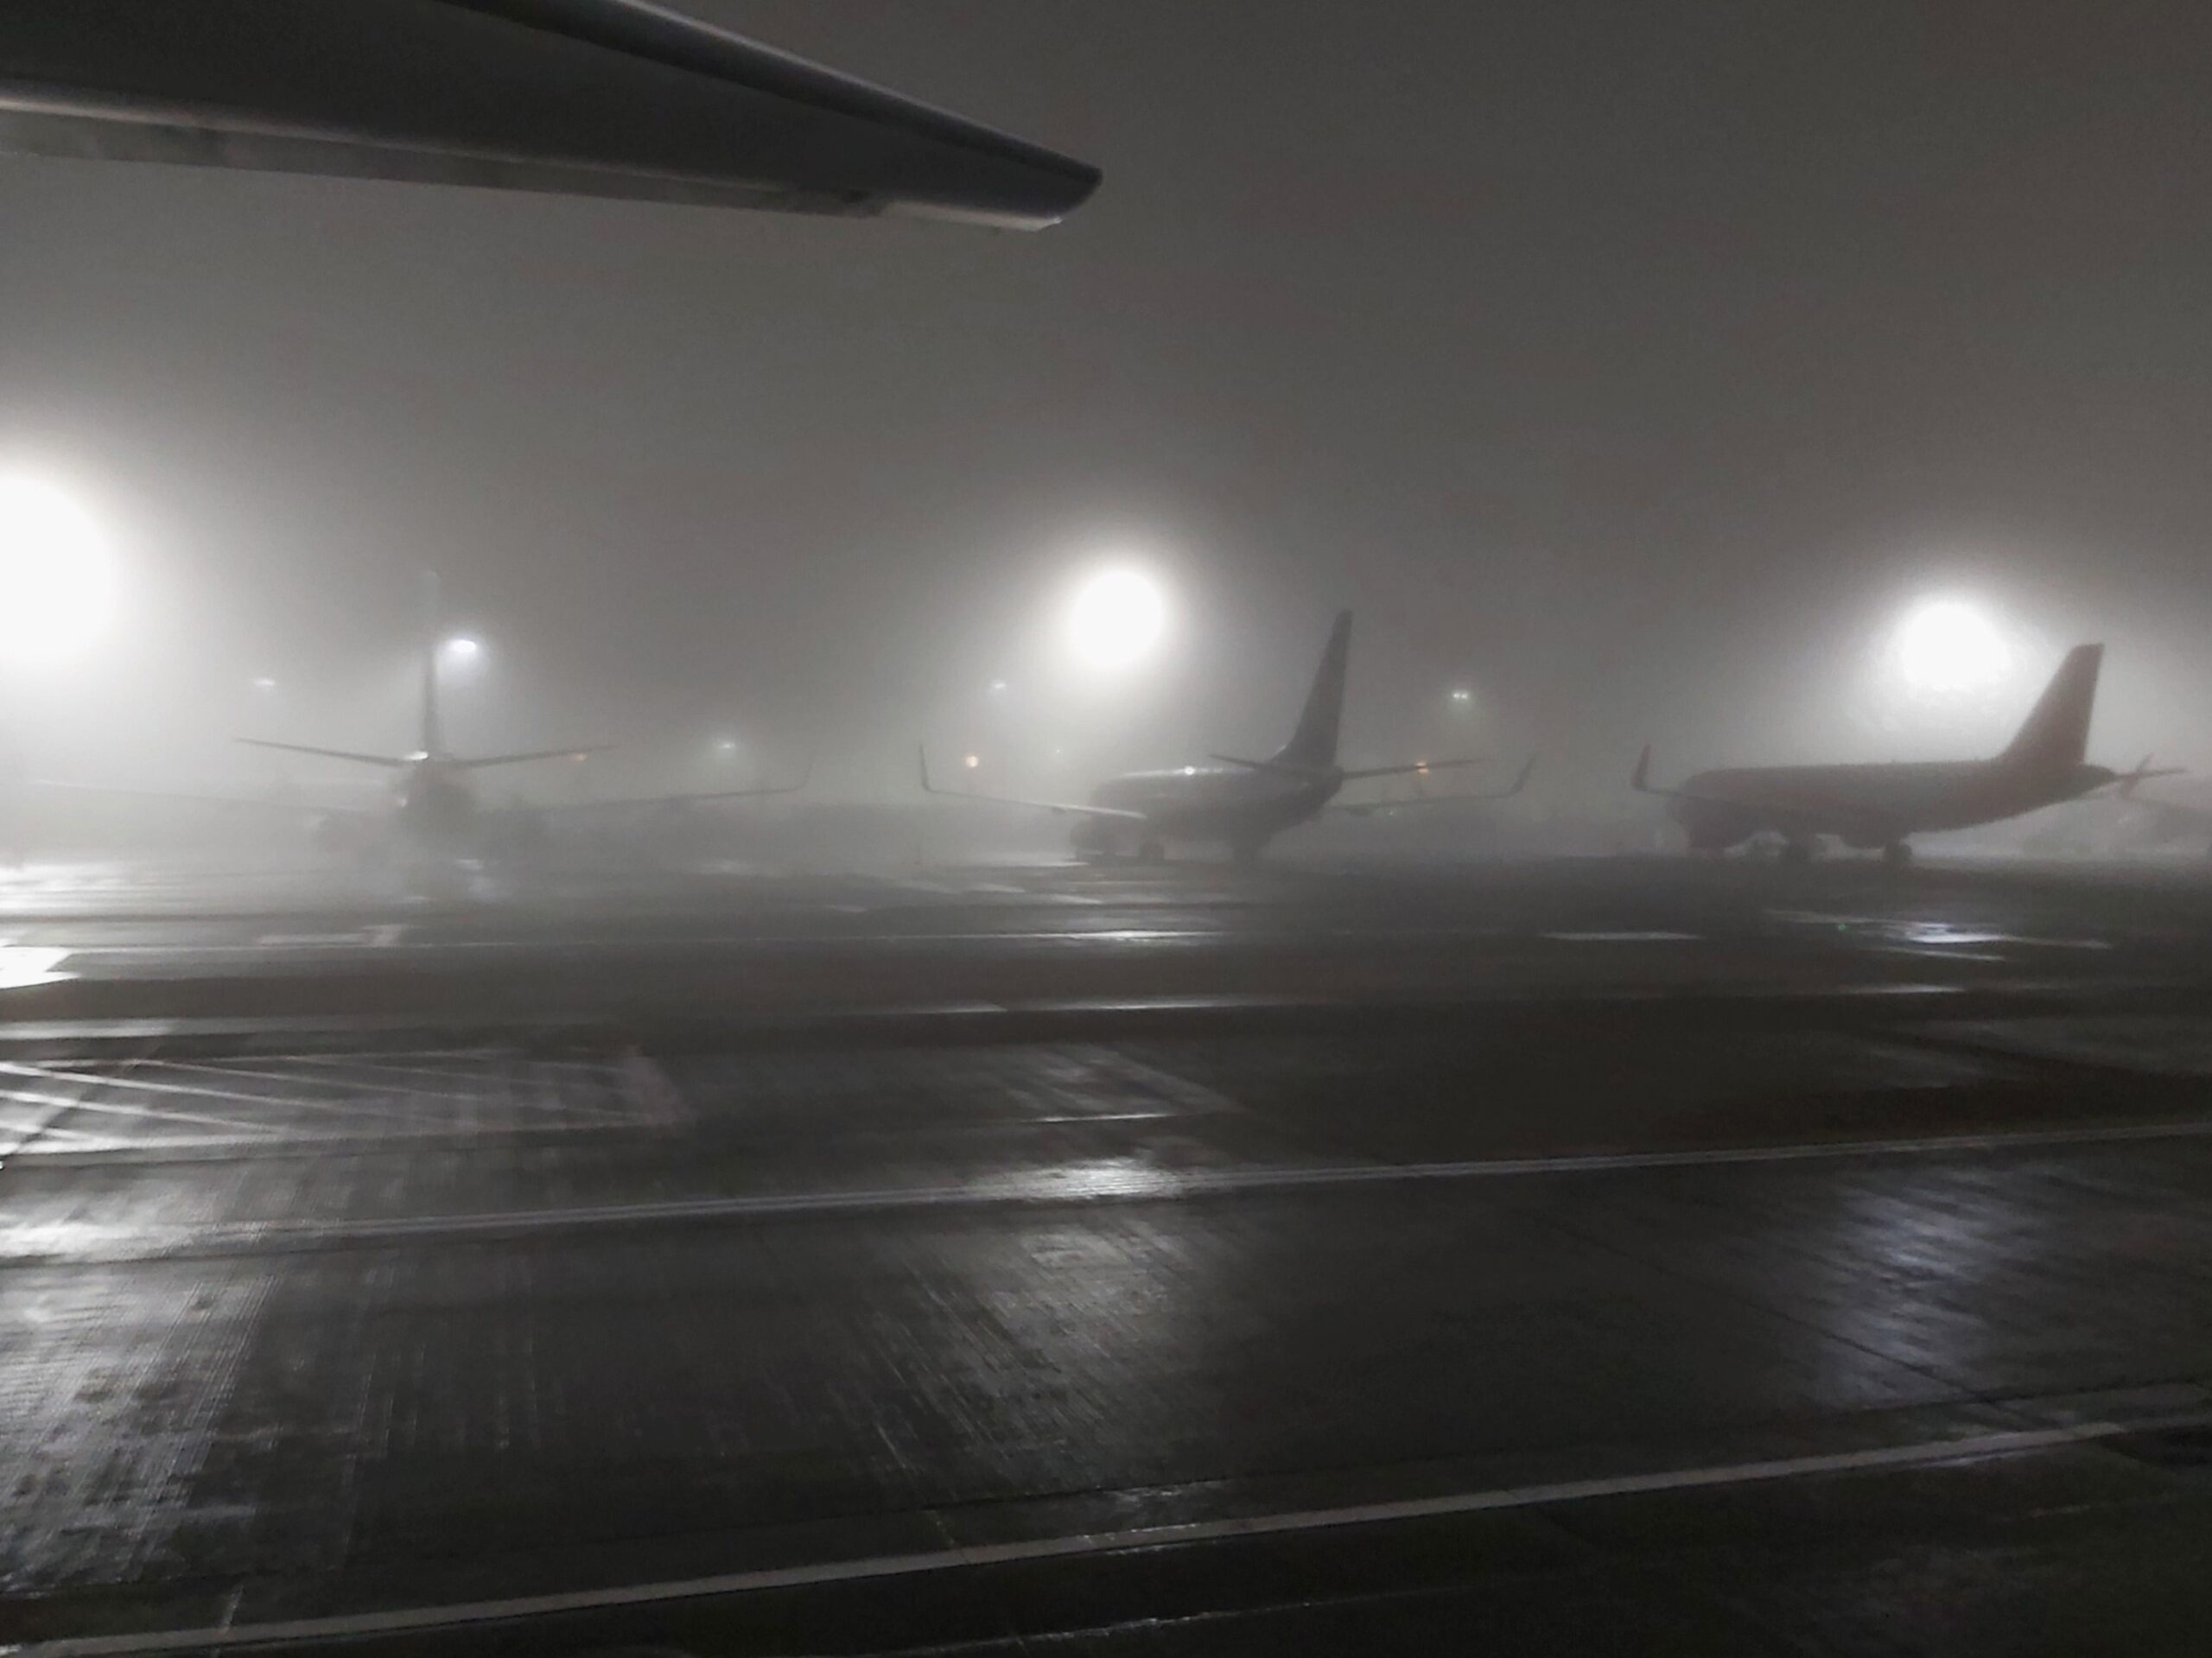 Planes in the mist at Stansted Airport, England.